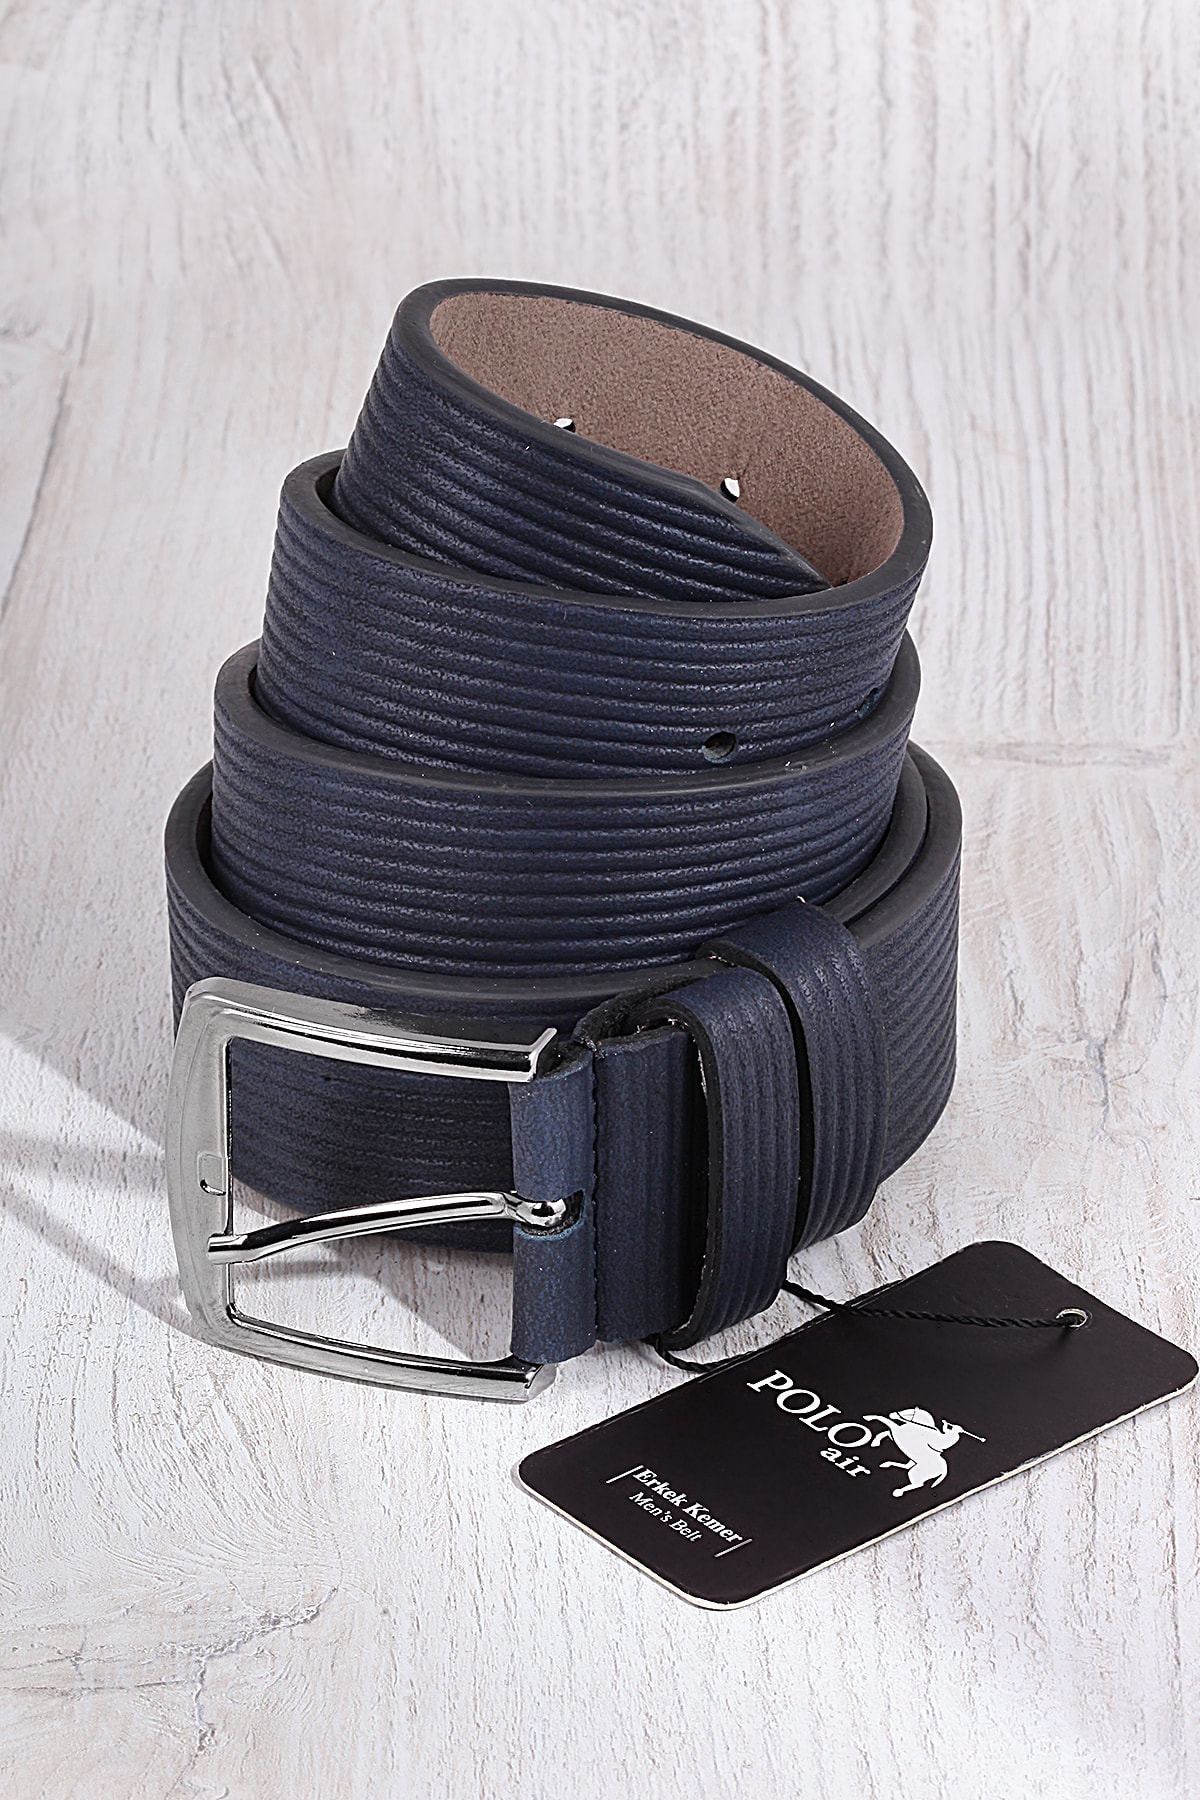 Polo Air Men's Leather Belt With Stripe Pattern, Navy Blue.